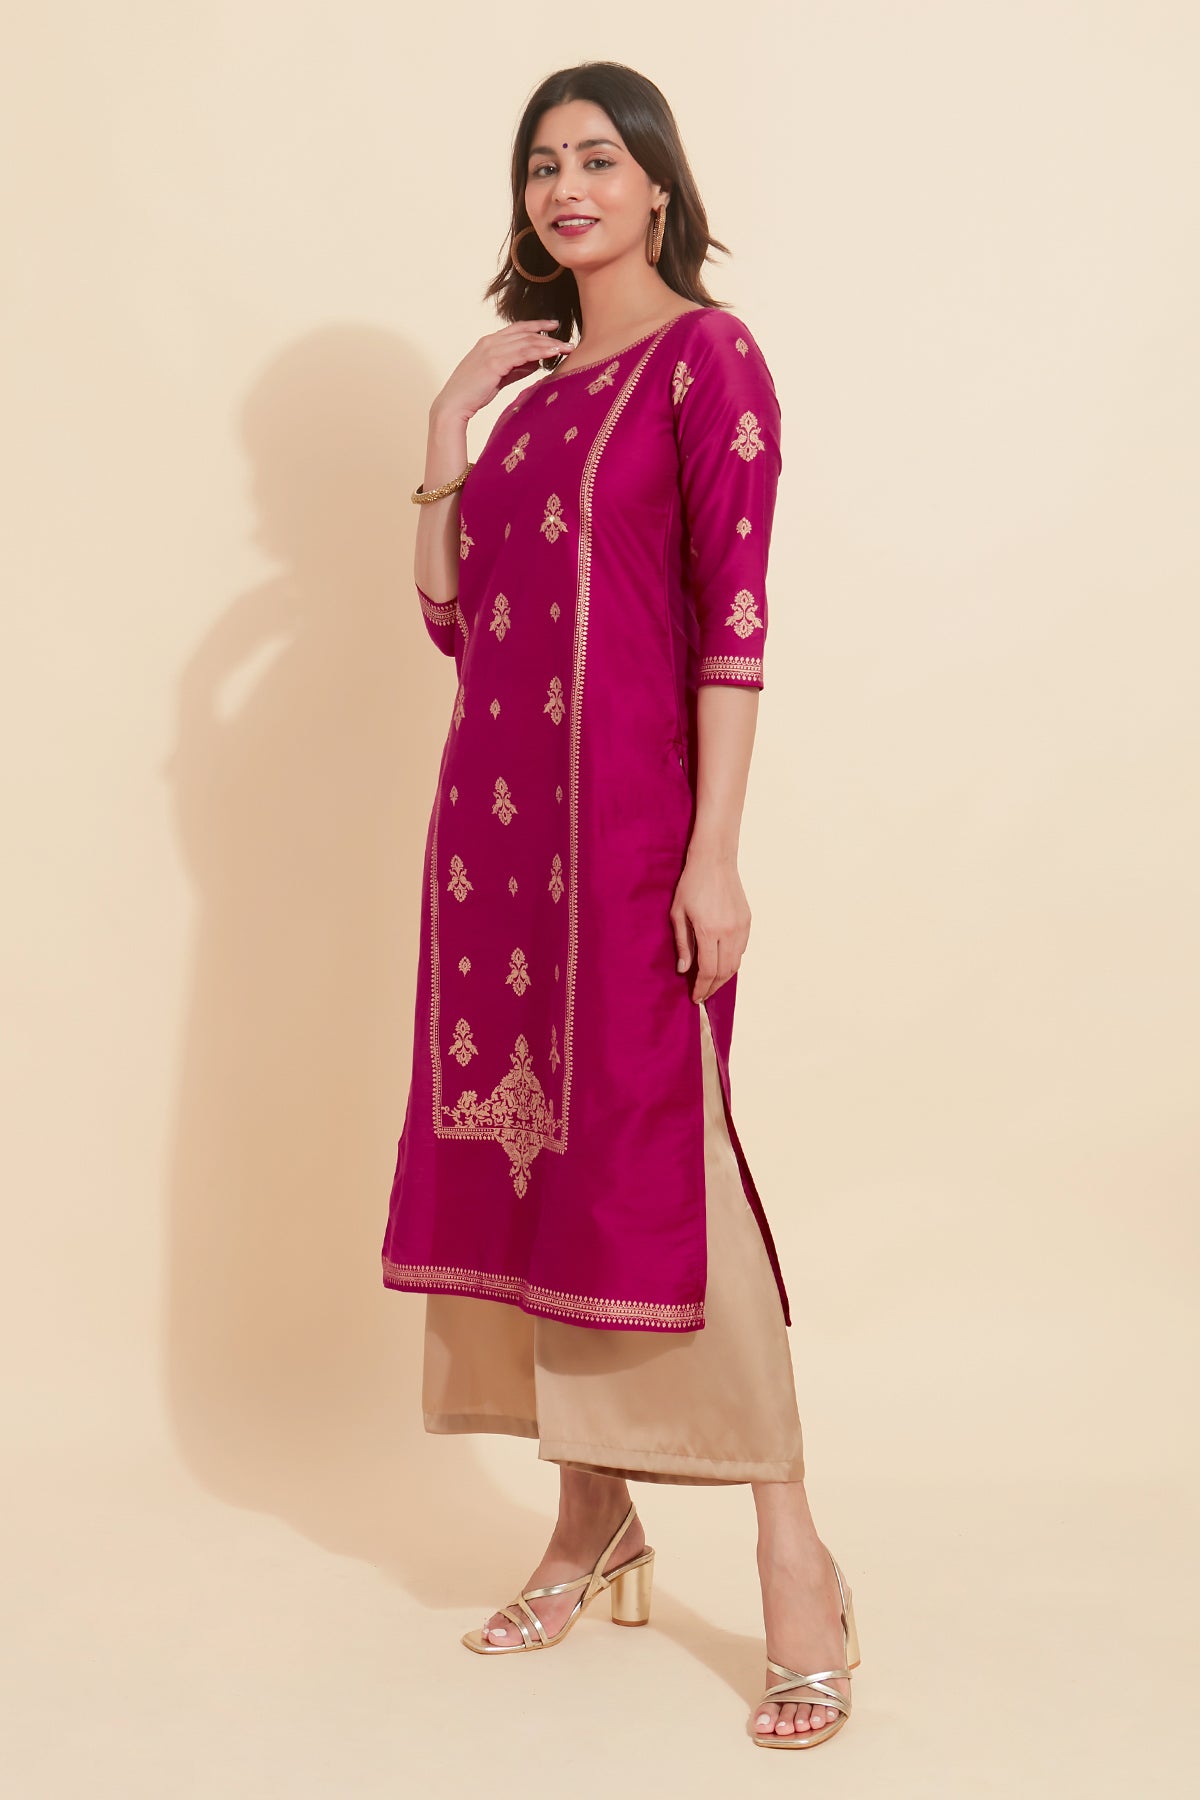 All Over Peacock Motif Printed With Foil Mirror Embellished Kurta - Pink